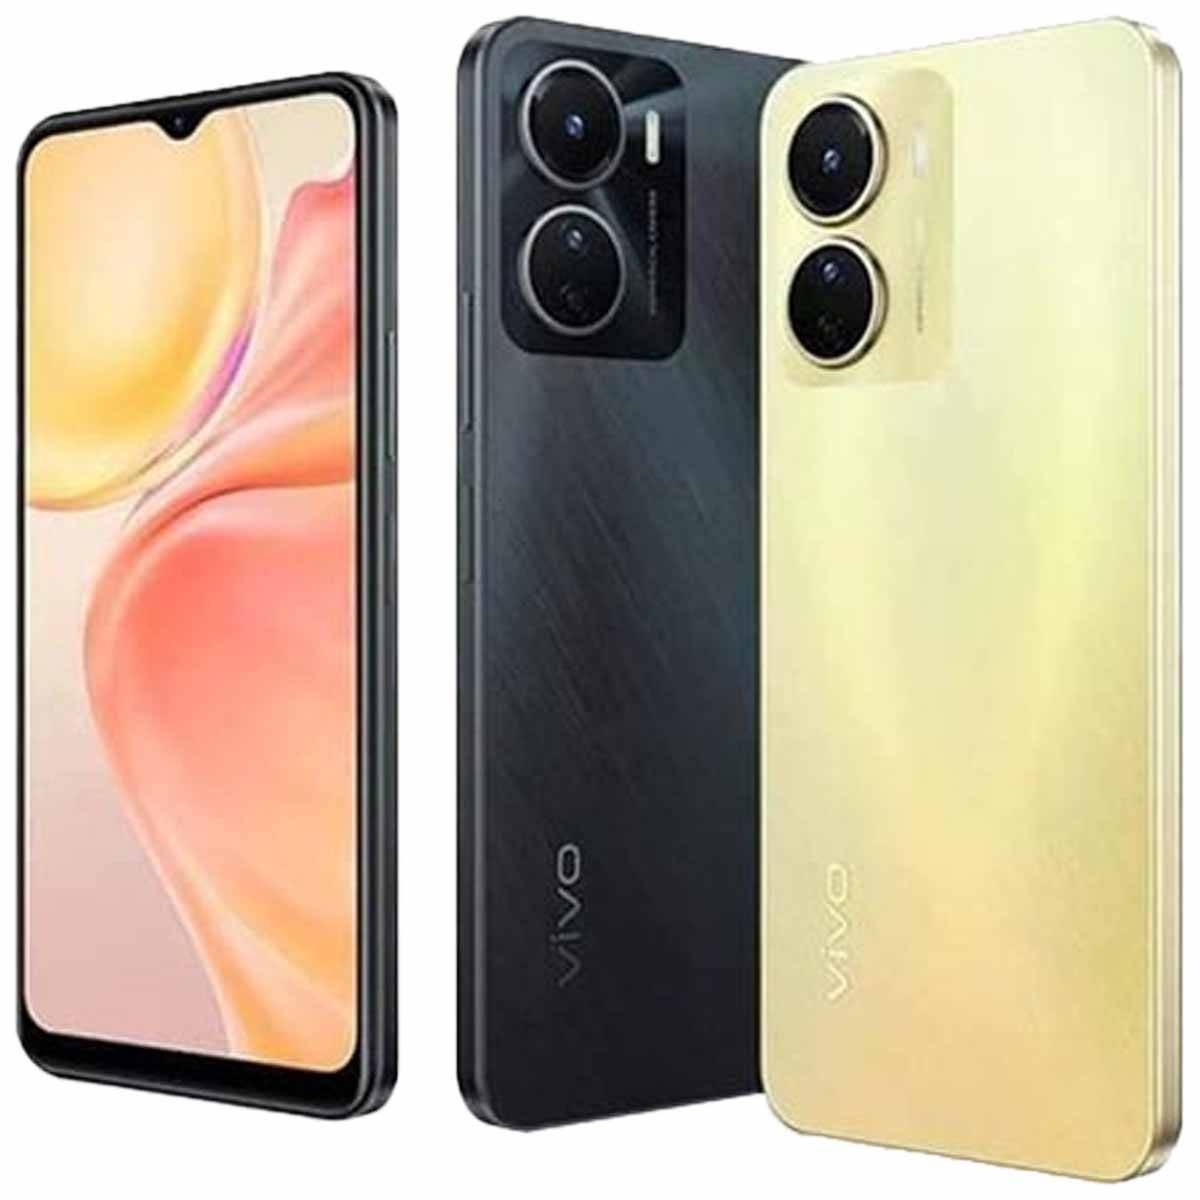 vivo Y17s Released 2023, October 02, 186g, 8.1mm thickness, Android 13, Funtouch 13, 64GB/128GB storage, microSDXC, 6.56"720x1612 pixels, 50MP1080p, 4/6GB RAMHelio G85, 5000mAh15W